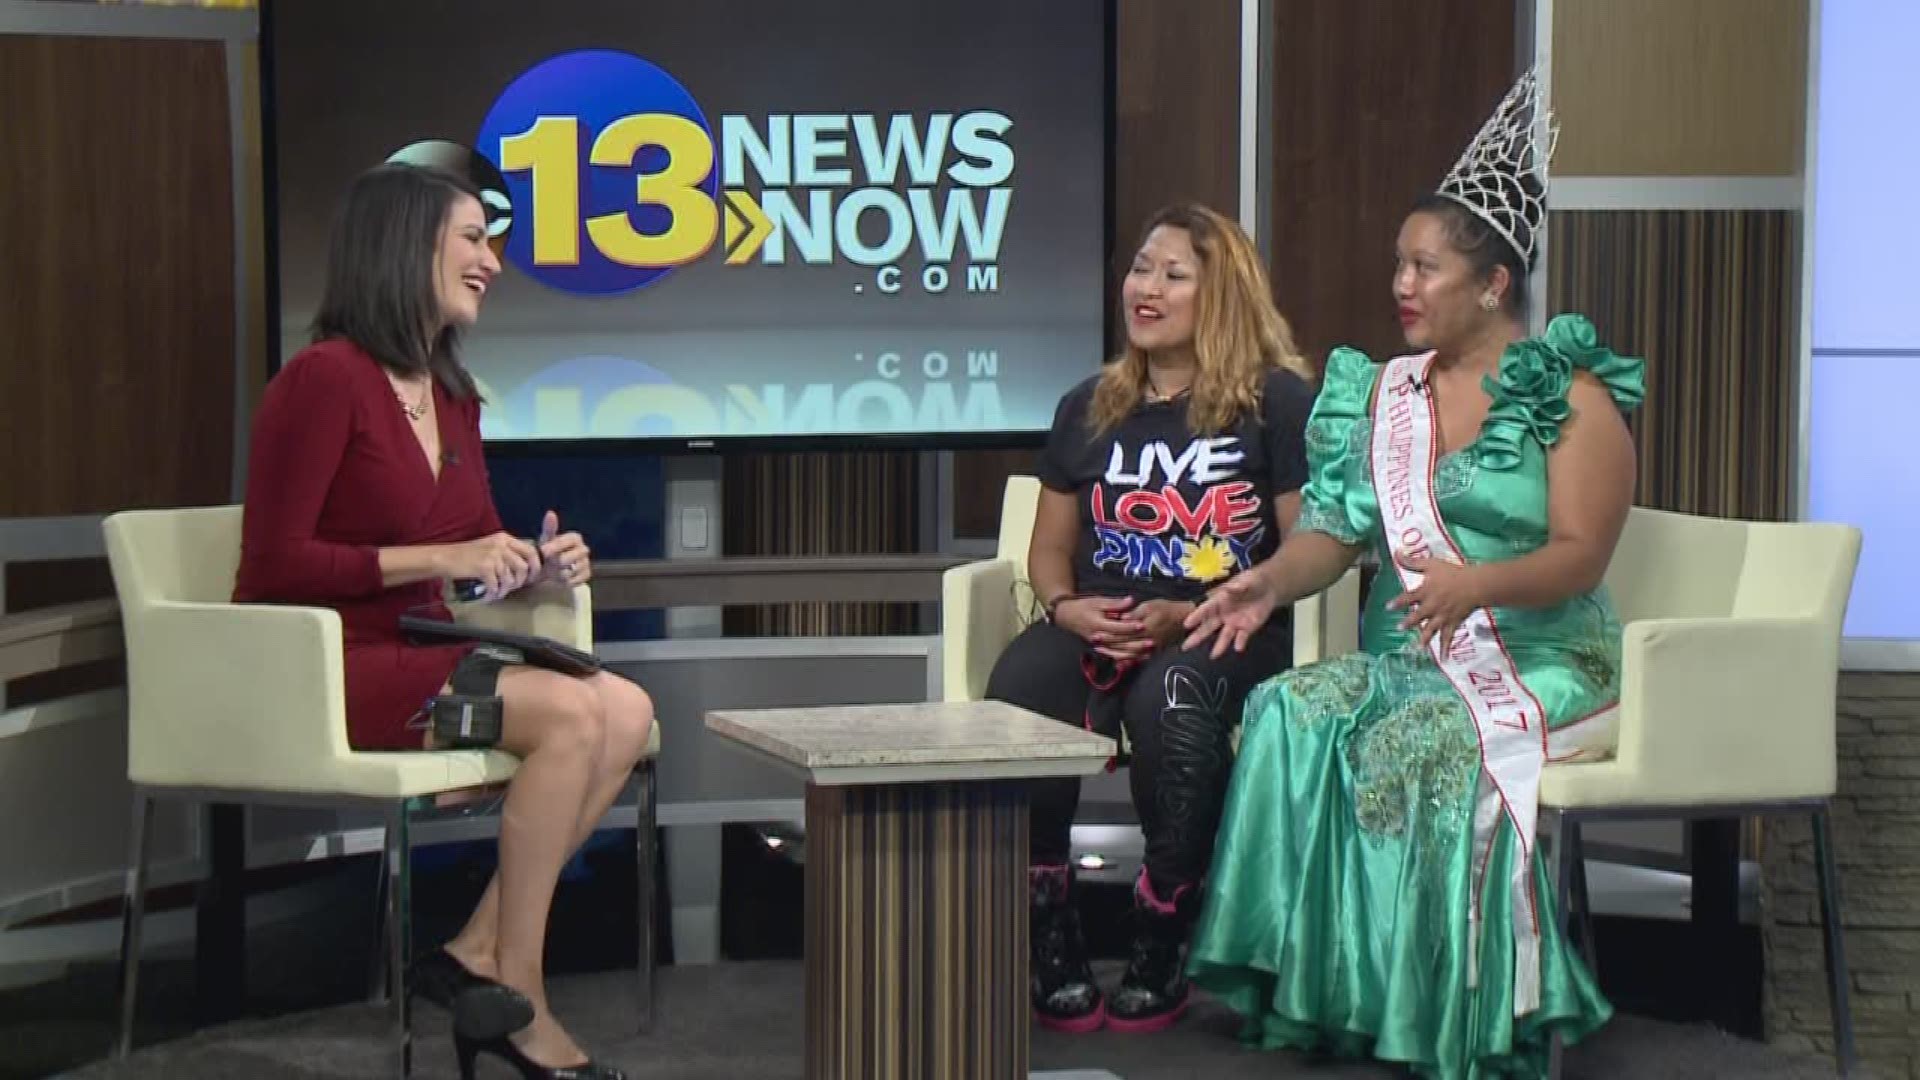 Get ready for a day full of Filipino-American culture, food and entertainment at the 2017 Fil Fest in downtown Norfolk.